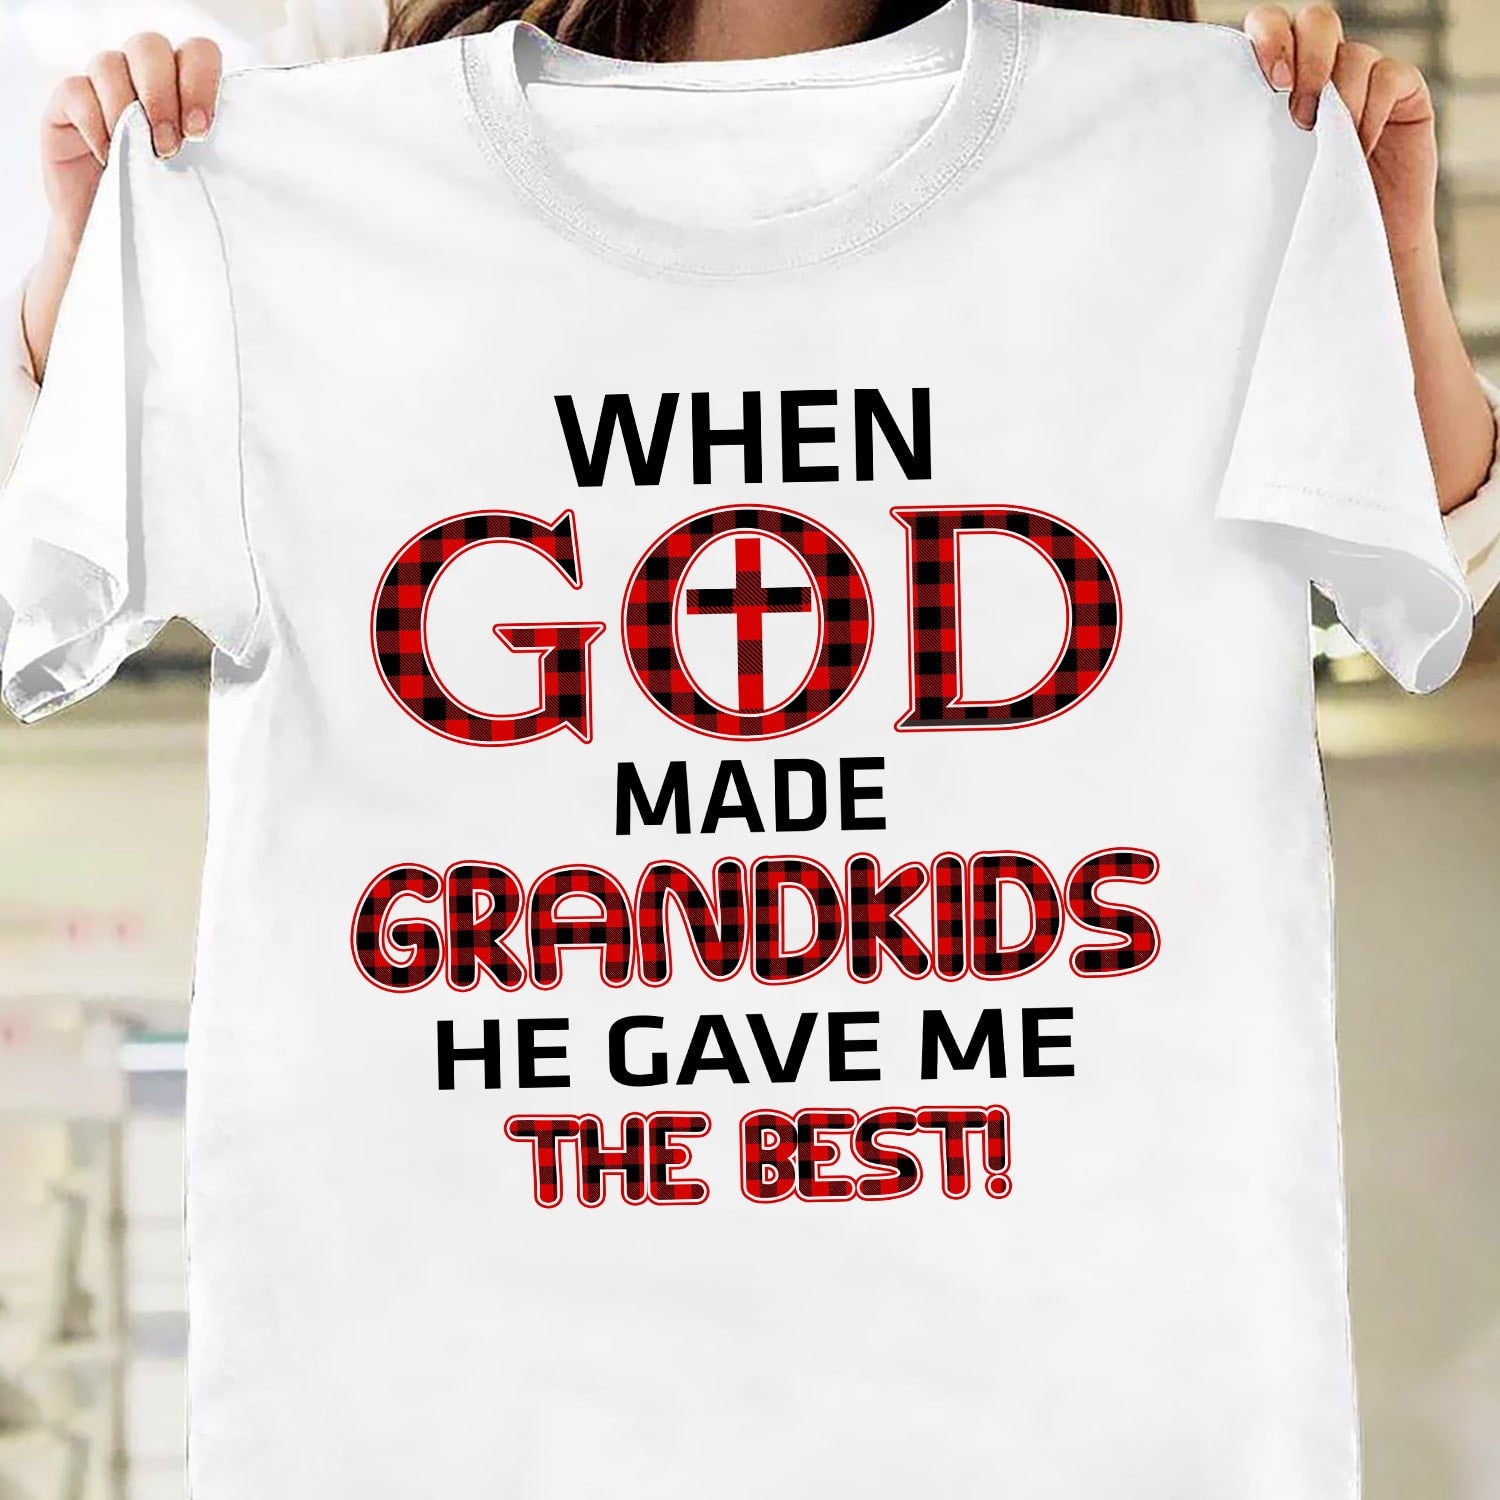 When god made grandkids he gave me the best - Jesus Apparel